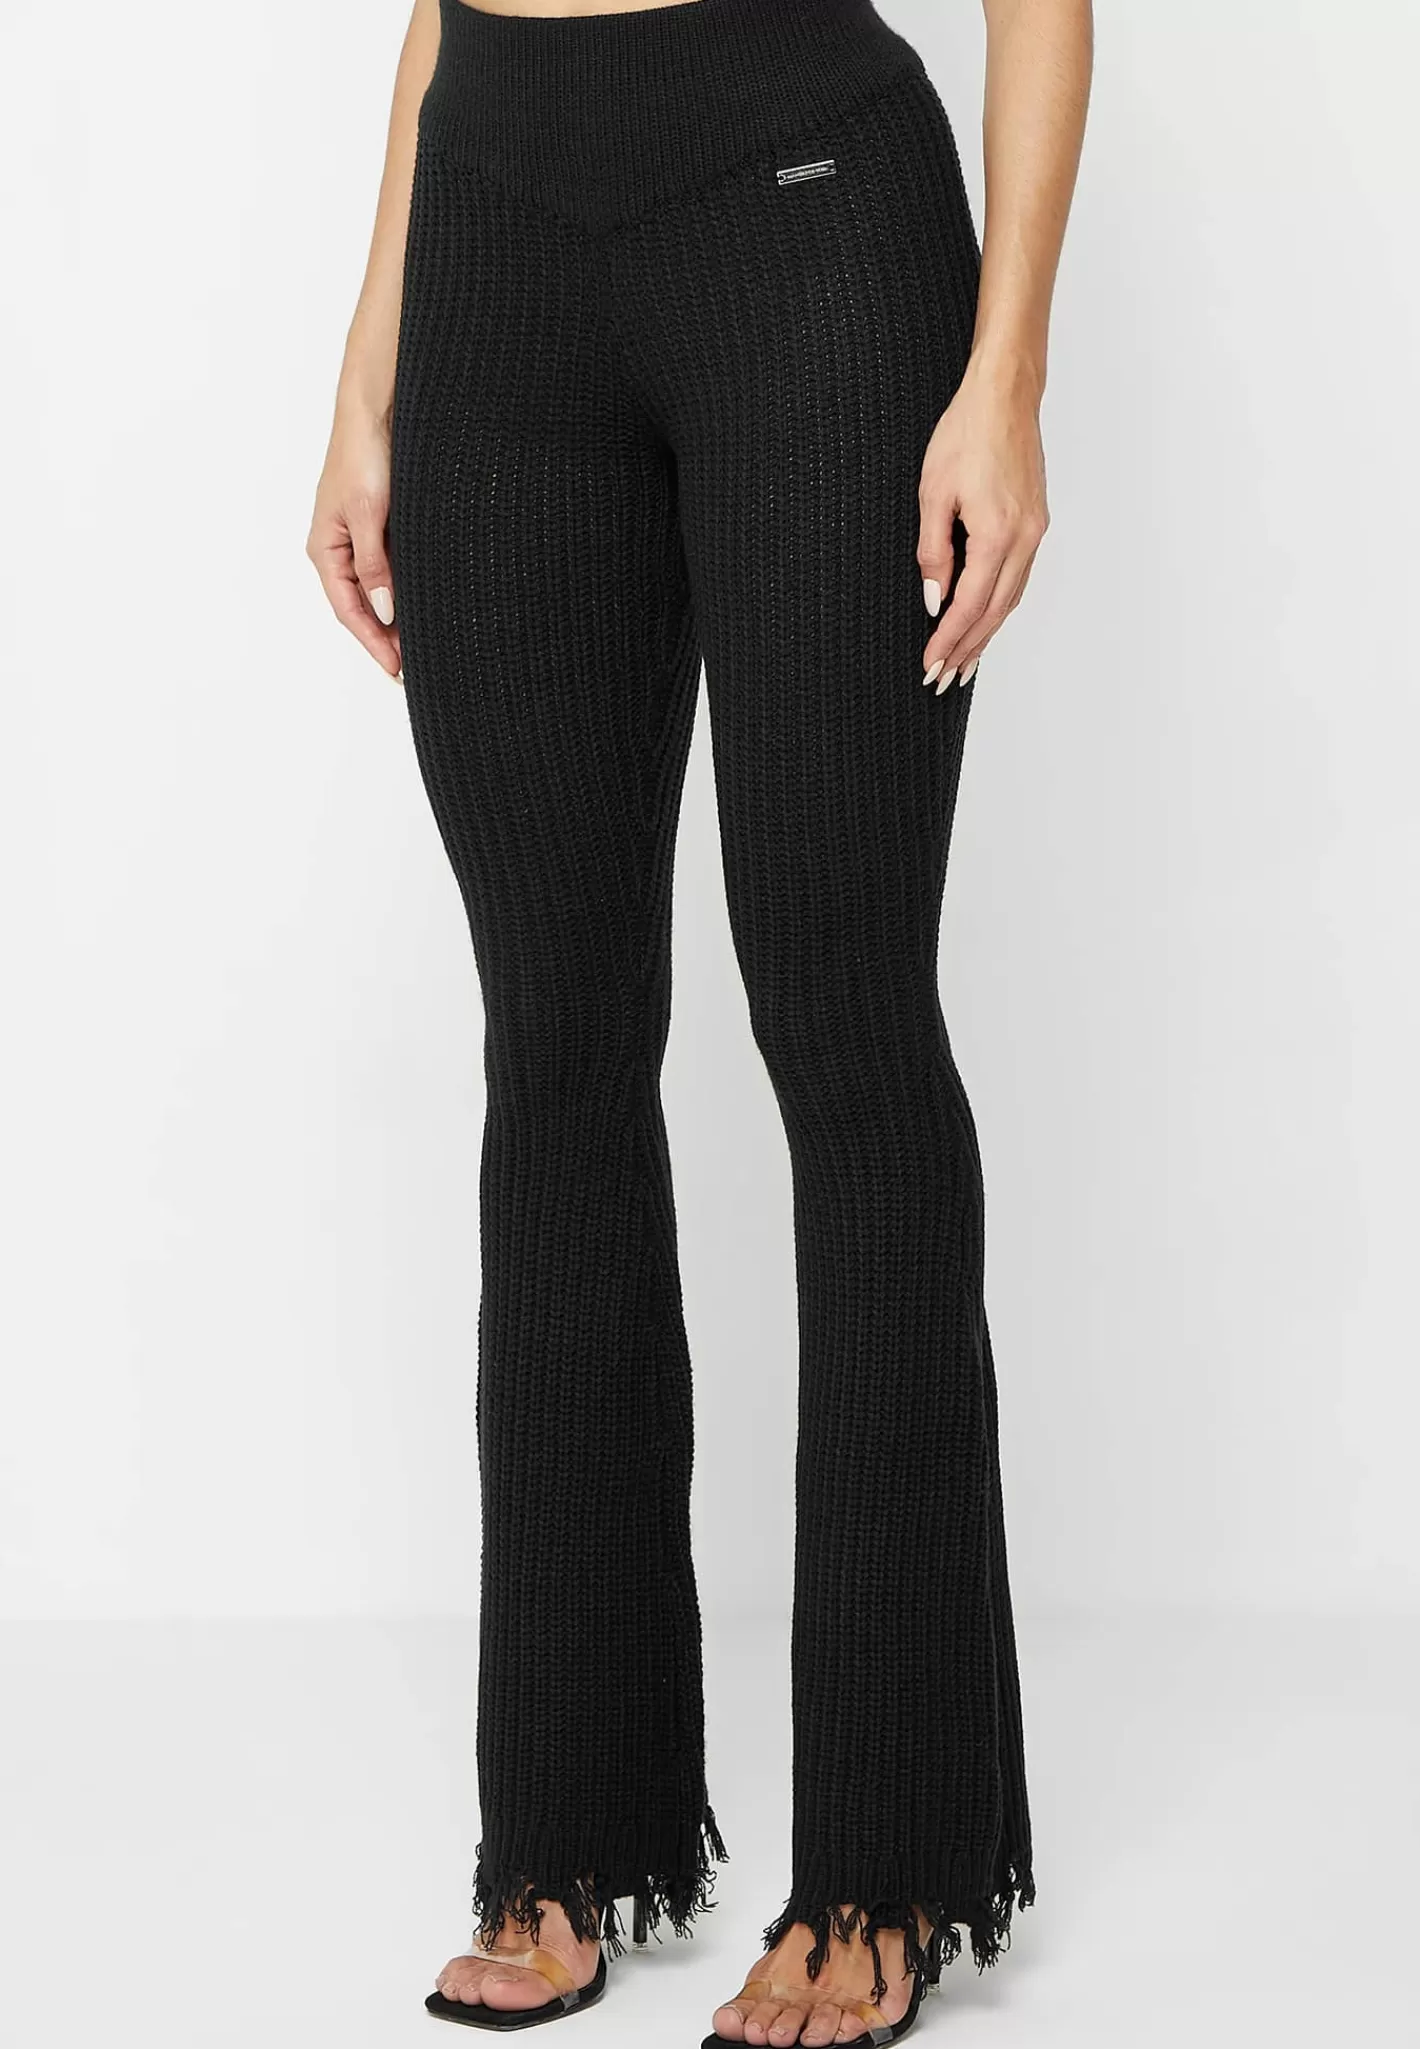 Distressed Knitted Fit and Flare Leggings - -Manière De Voir Hot